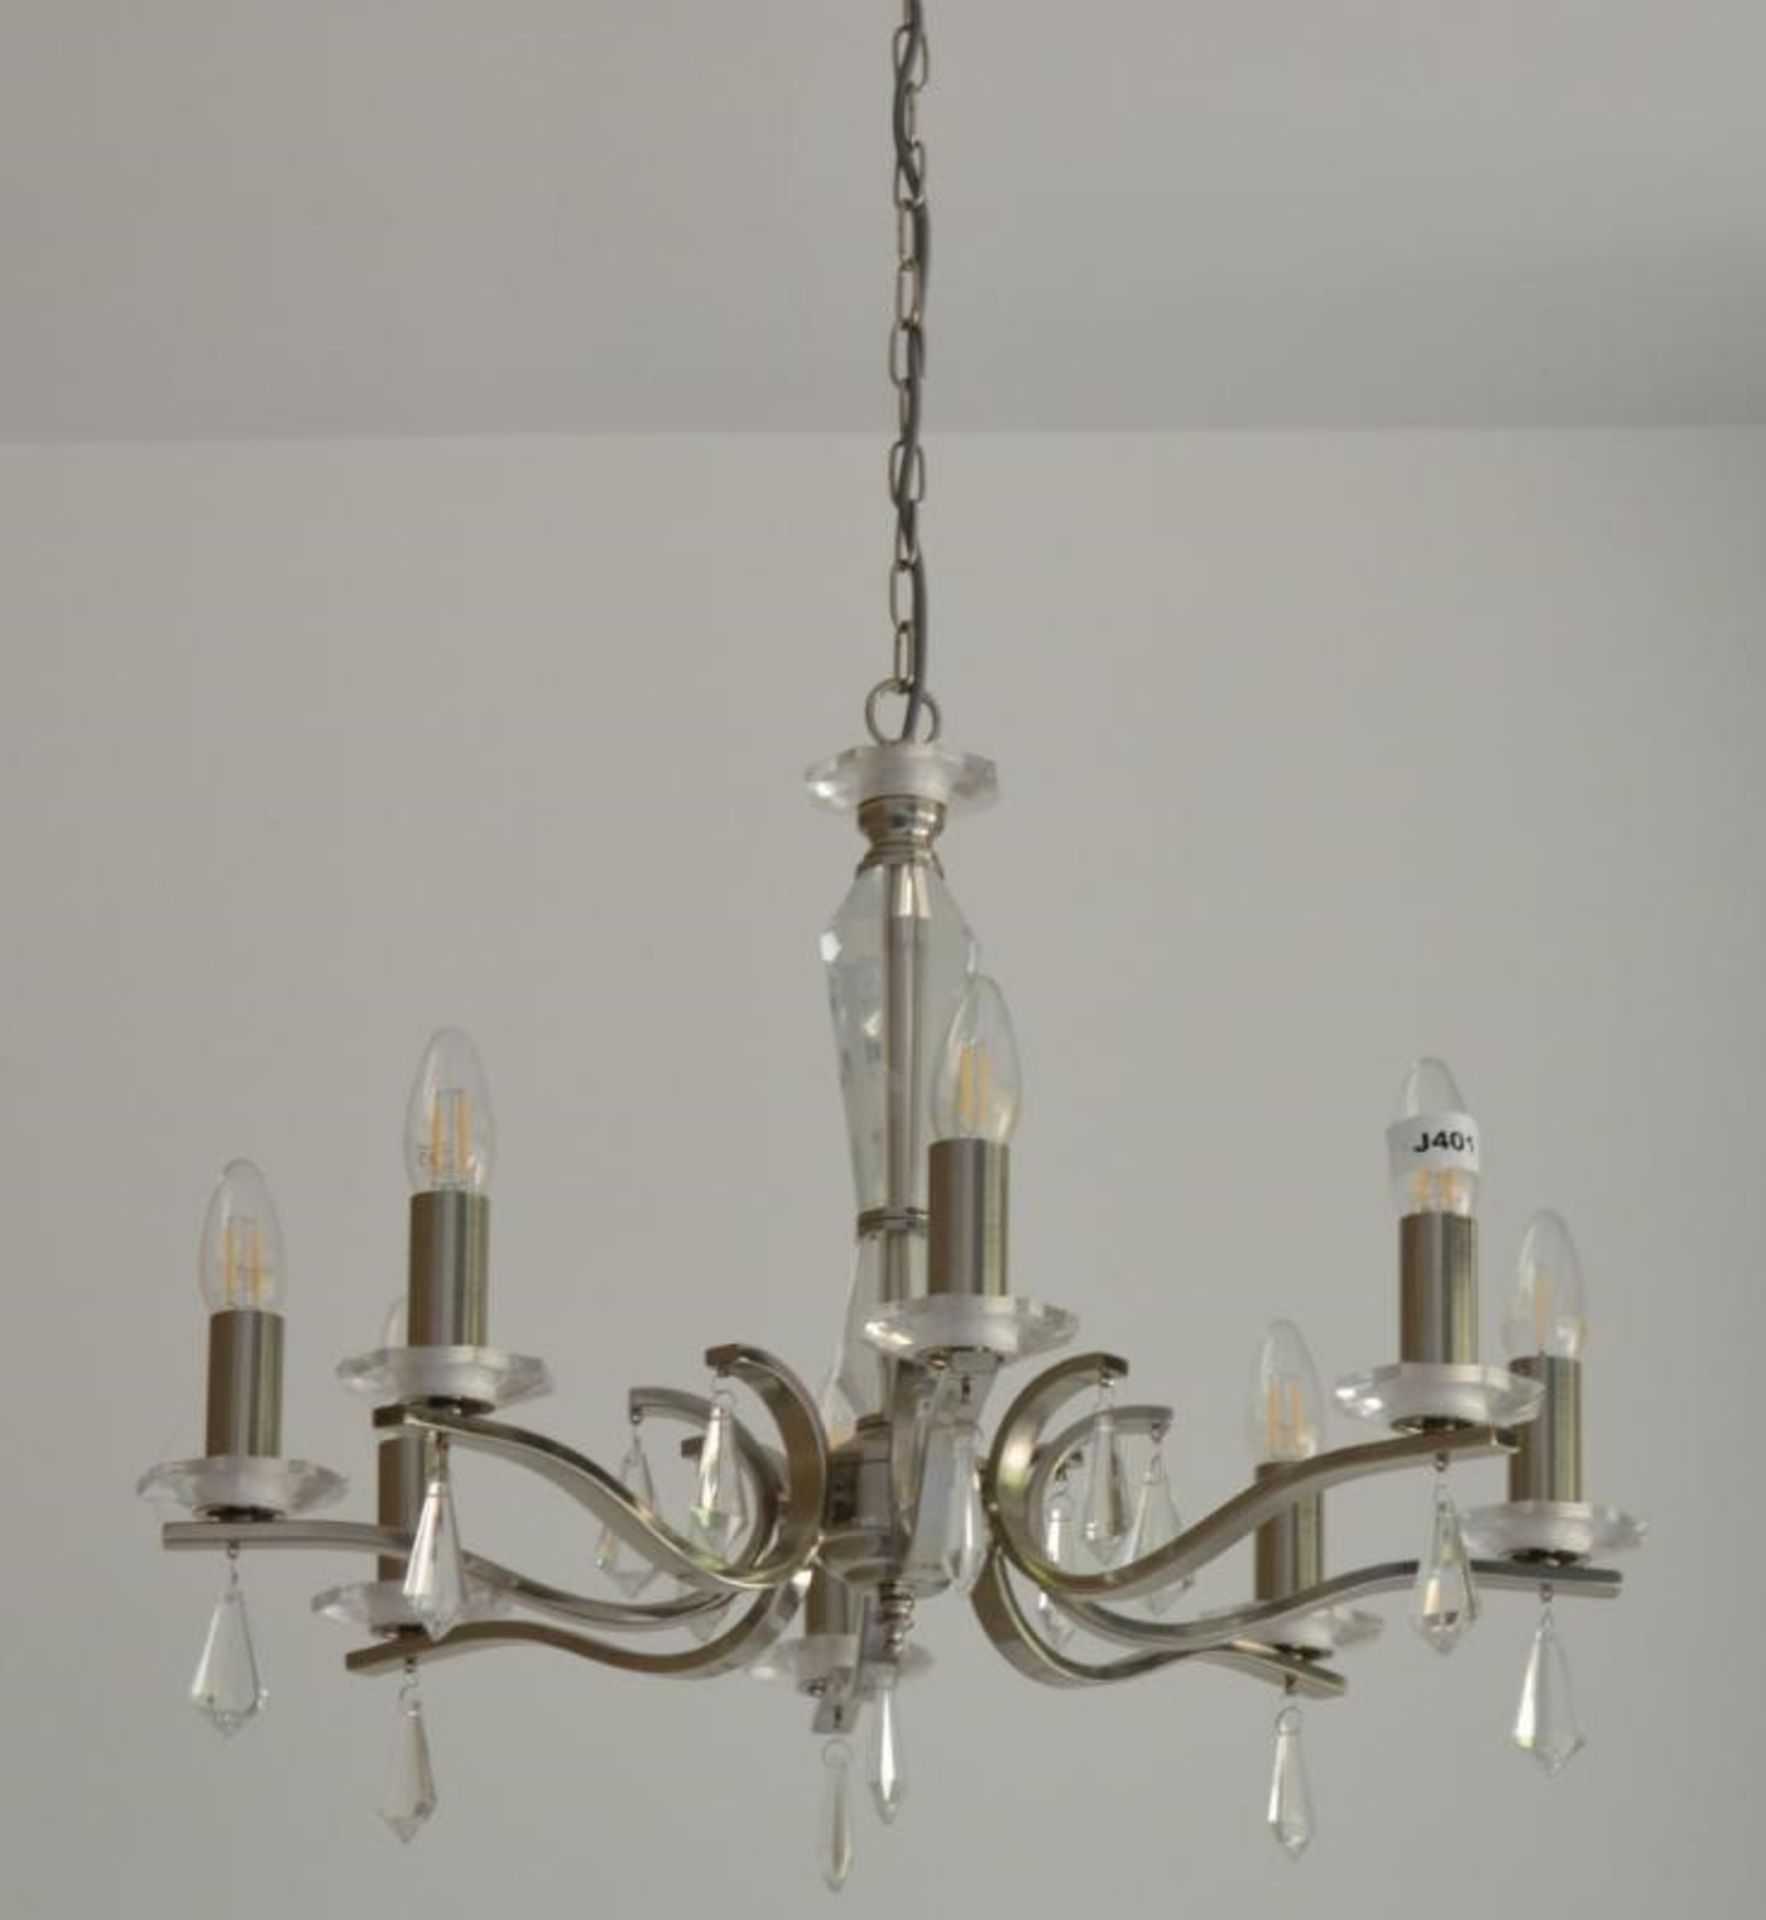 1 x Royale Satin Silver Metal 8 Light Ceiling Fitting With Hexagonal Glass Sconces - Ex Display Stoc - Image 4 of 6